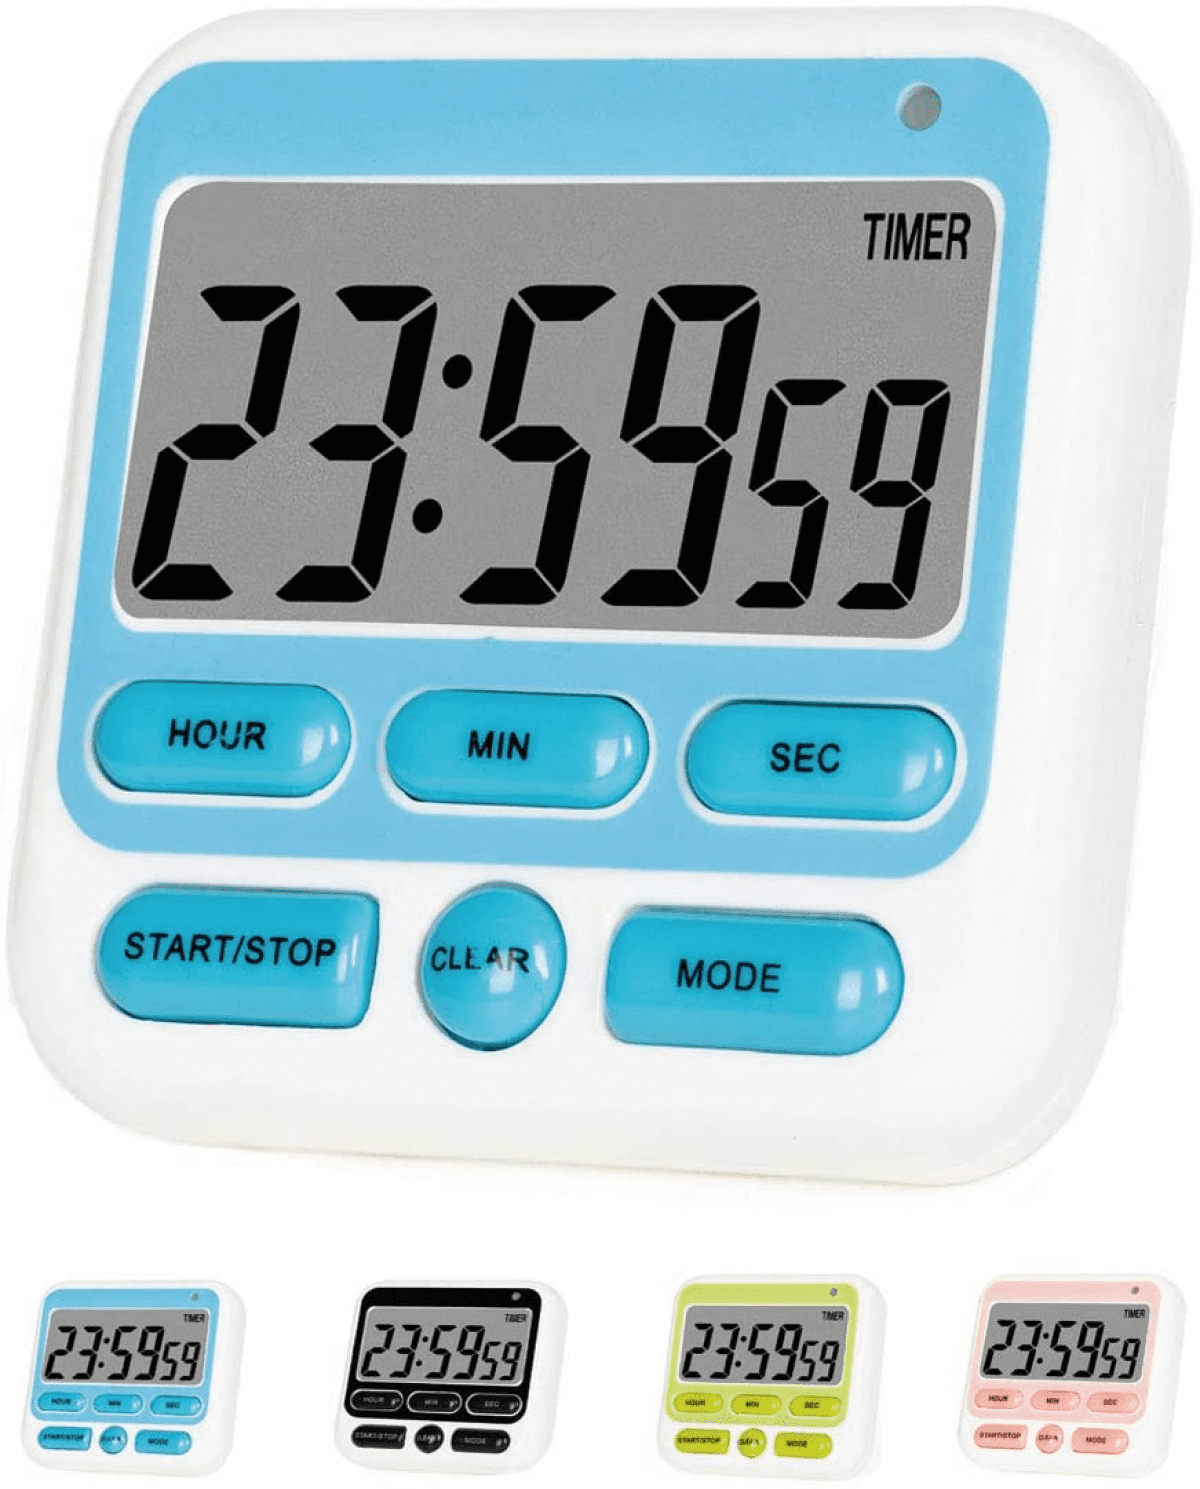 Large LCD Display Digital Kitchen 12 Hour Cook Timer Count-Down Up Clock Alarms 